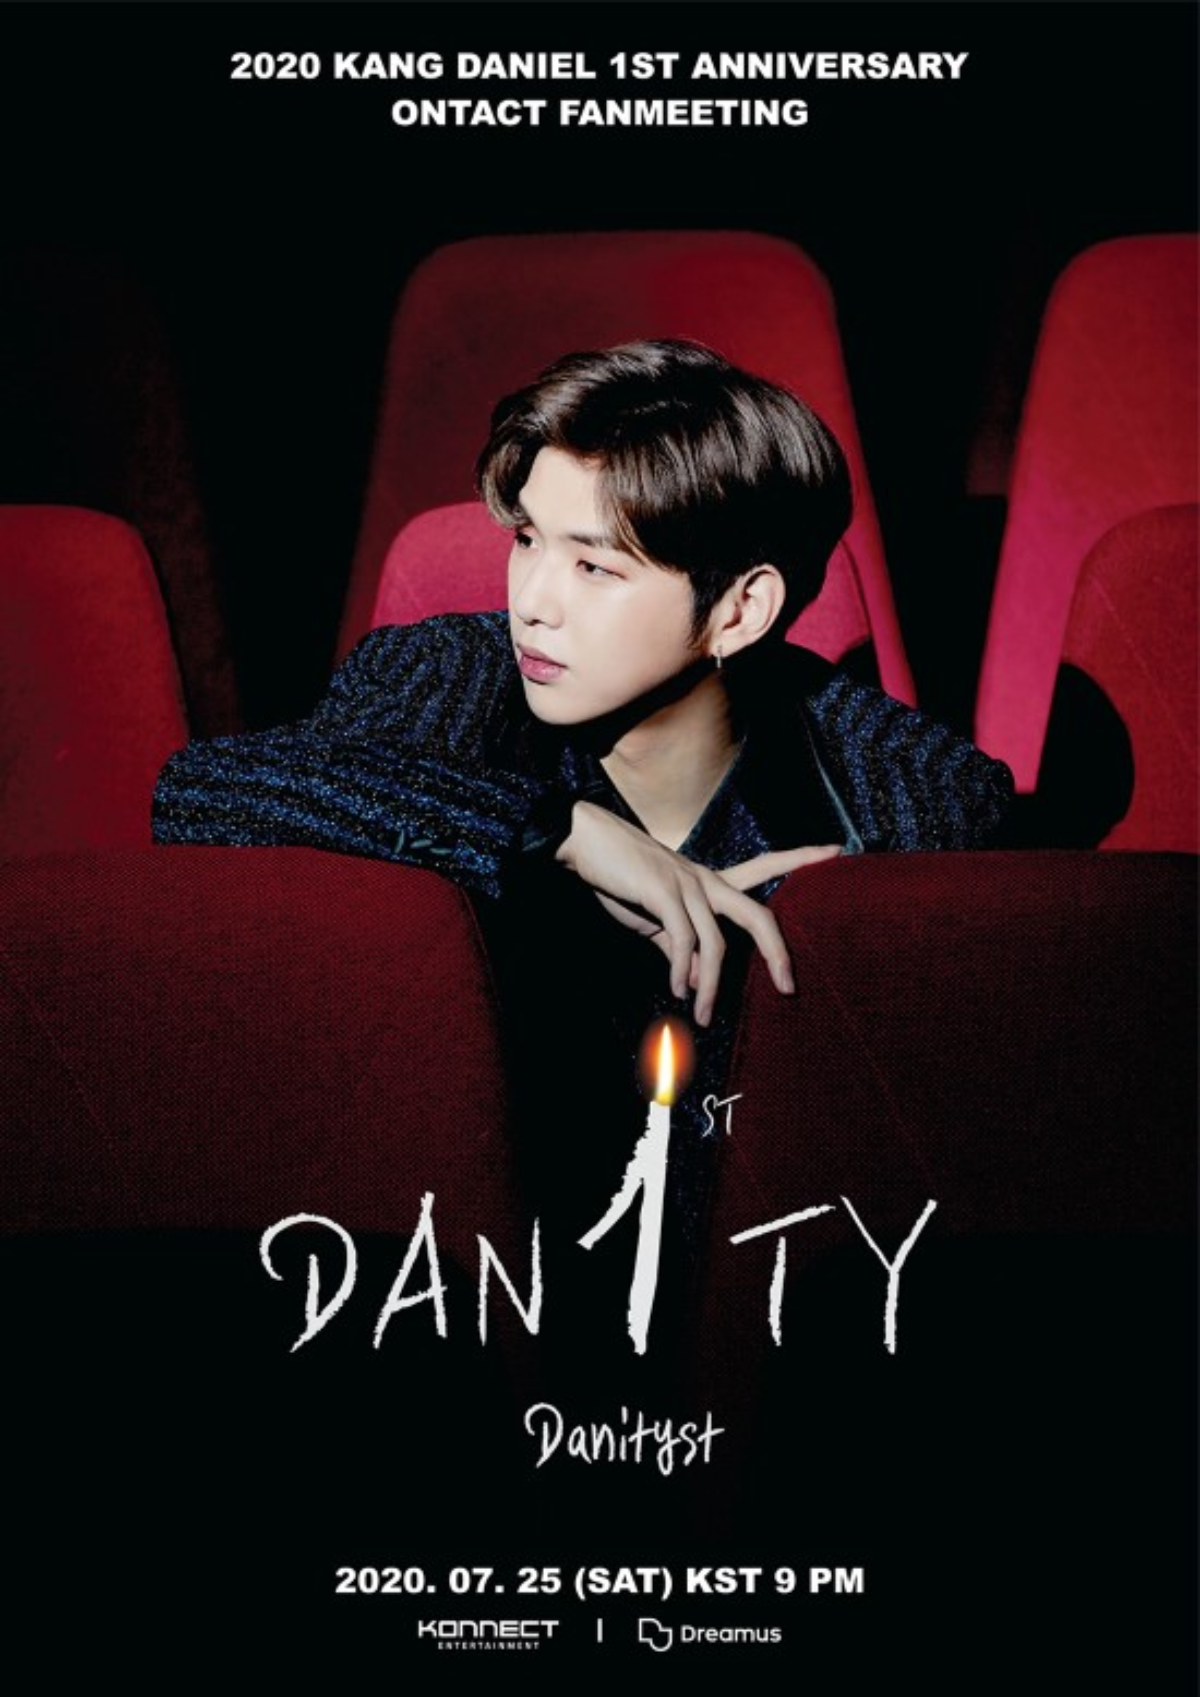 Kang Daniel will Hold an Online Fan Meeting on July 25 (today) - to be broadcast live worldwide